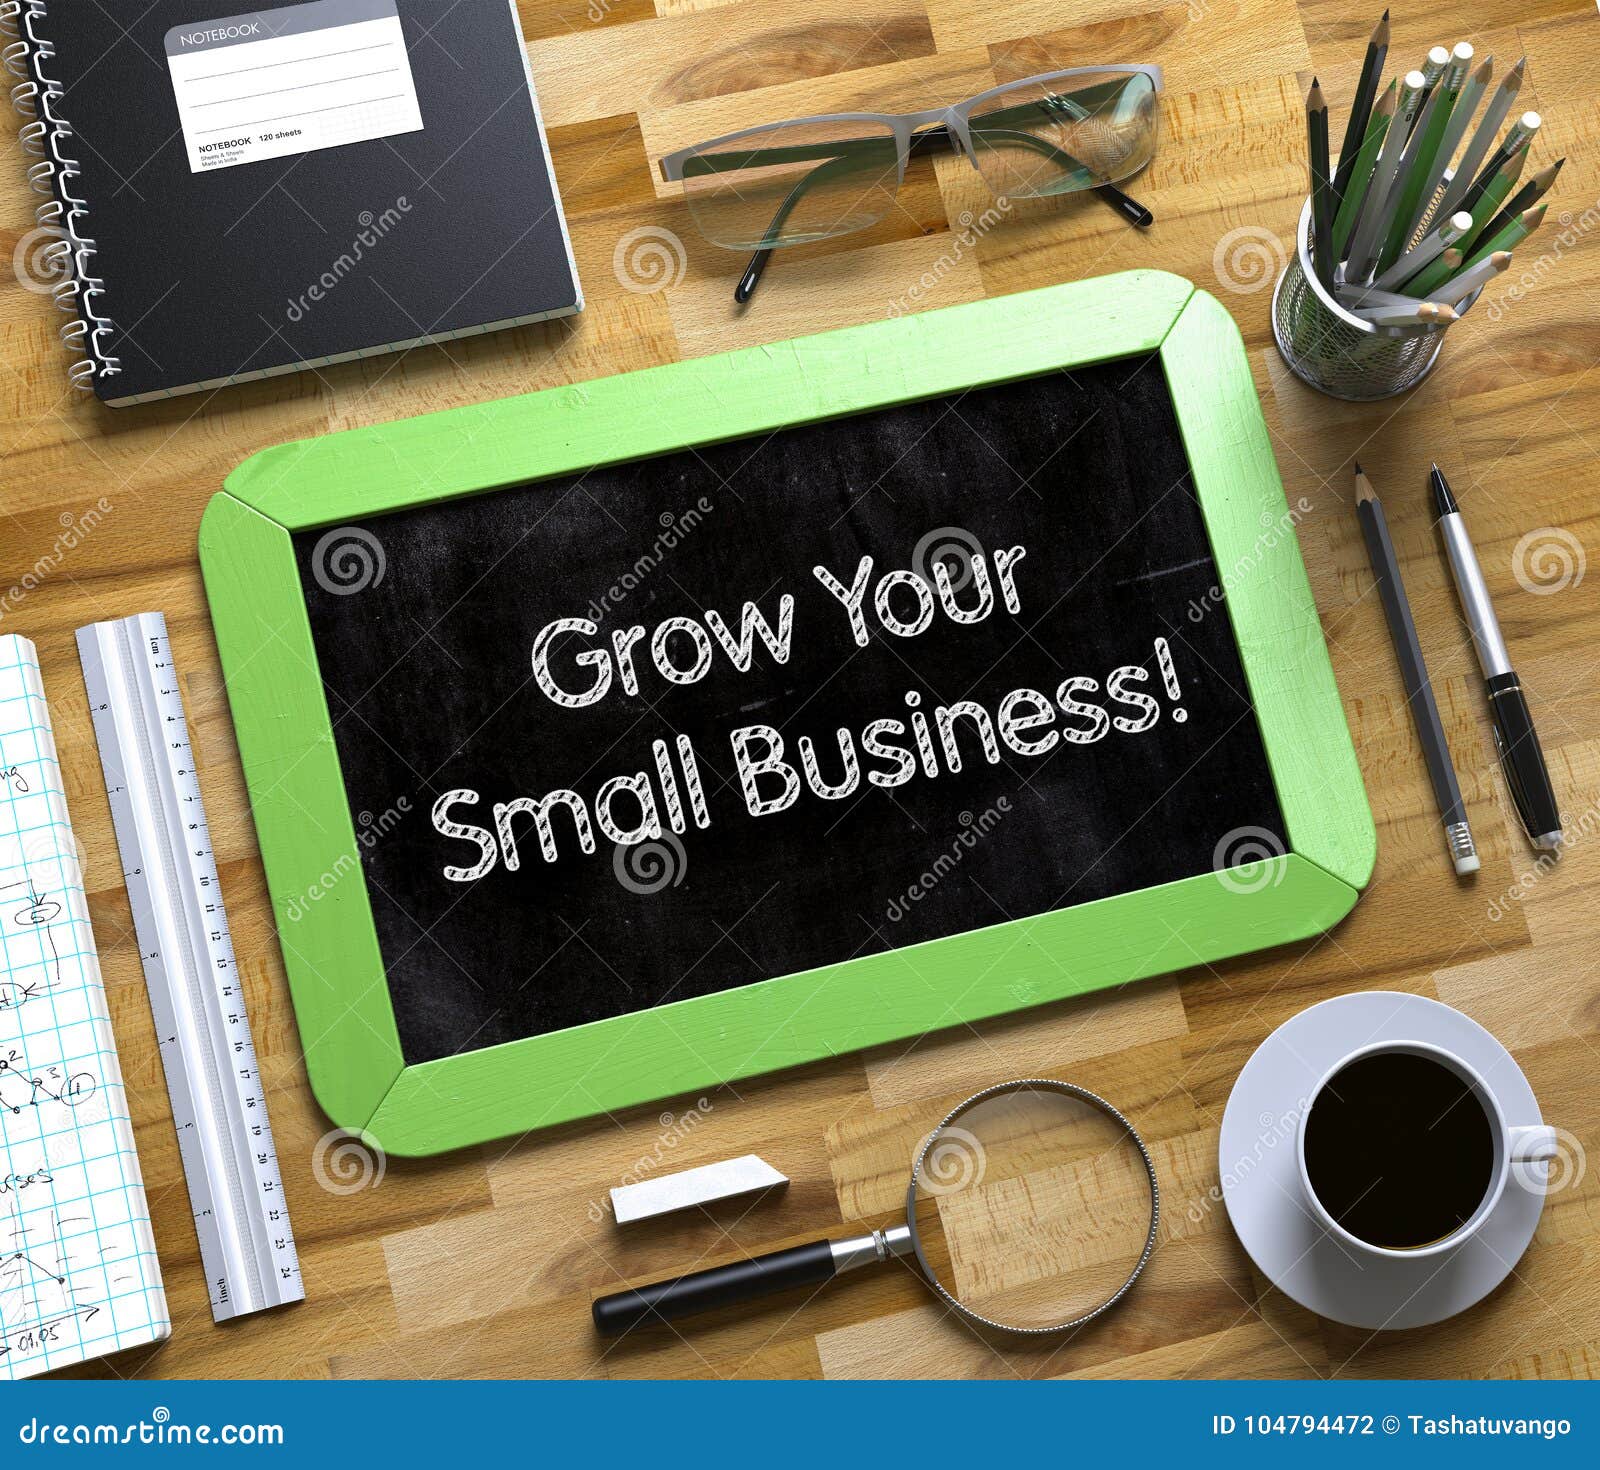 grow your small business. 3d concept.